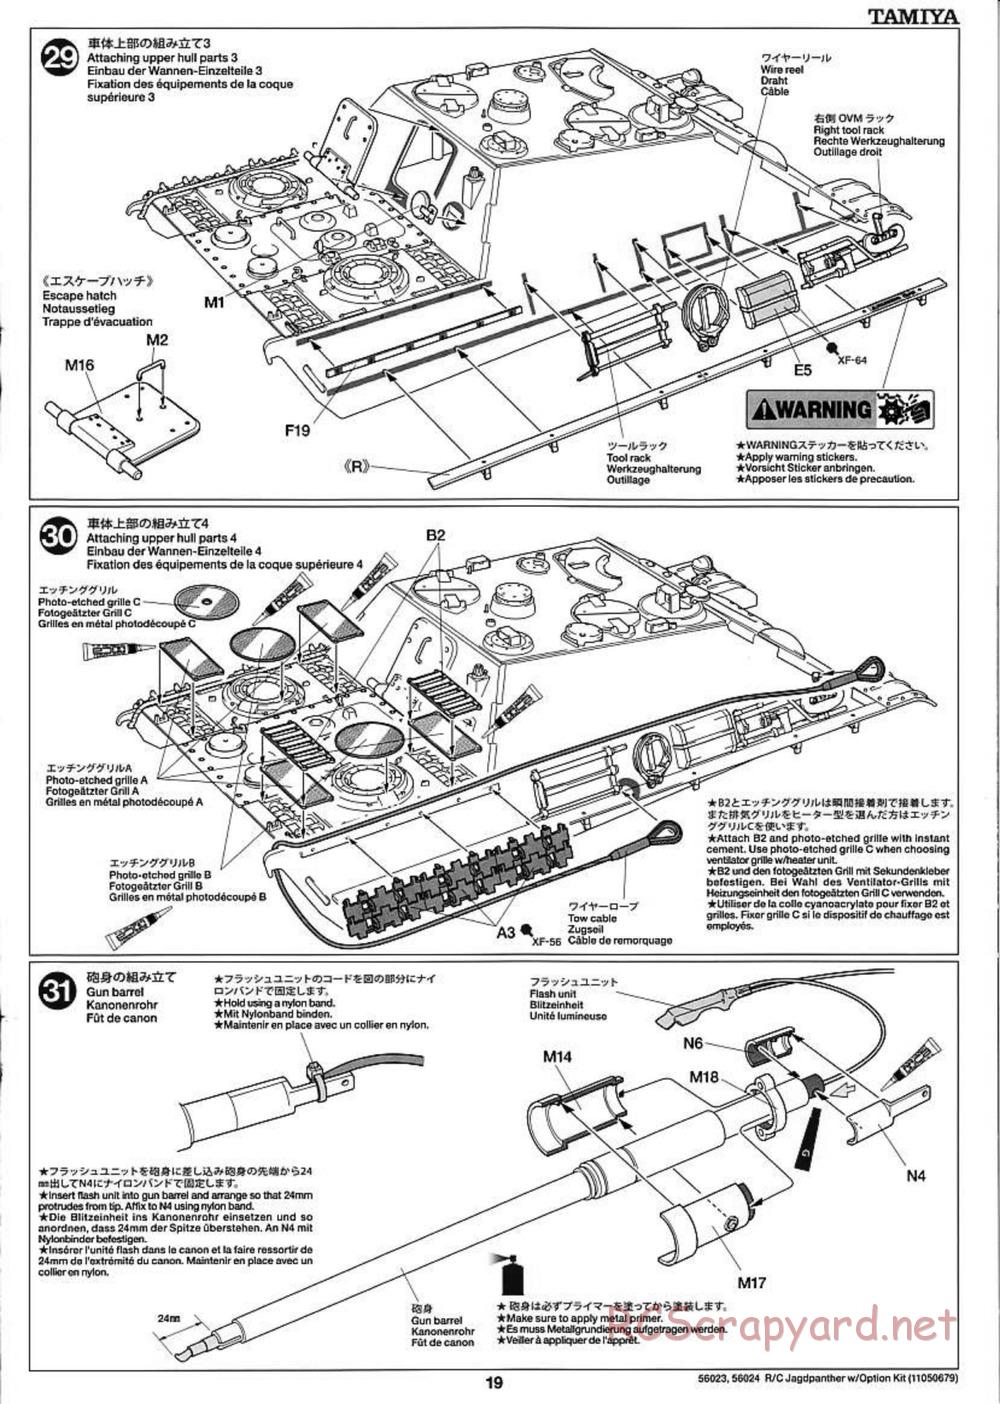 Tamiya - Jagdpanther - 1/16 Scale Chassis - Manual - Page 19